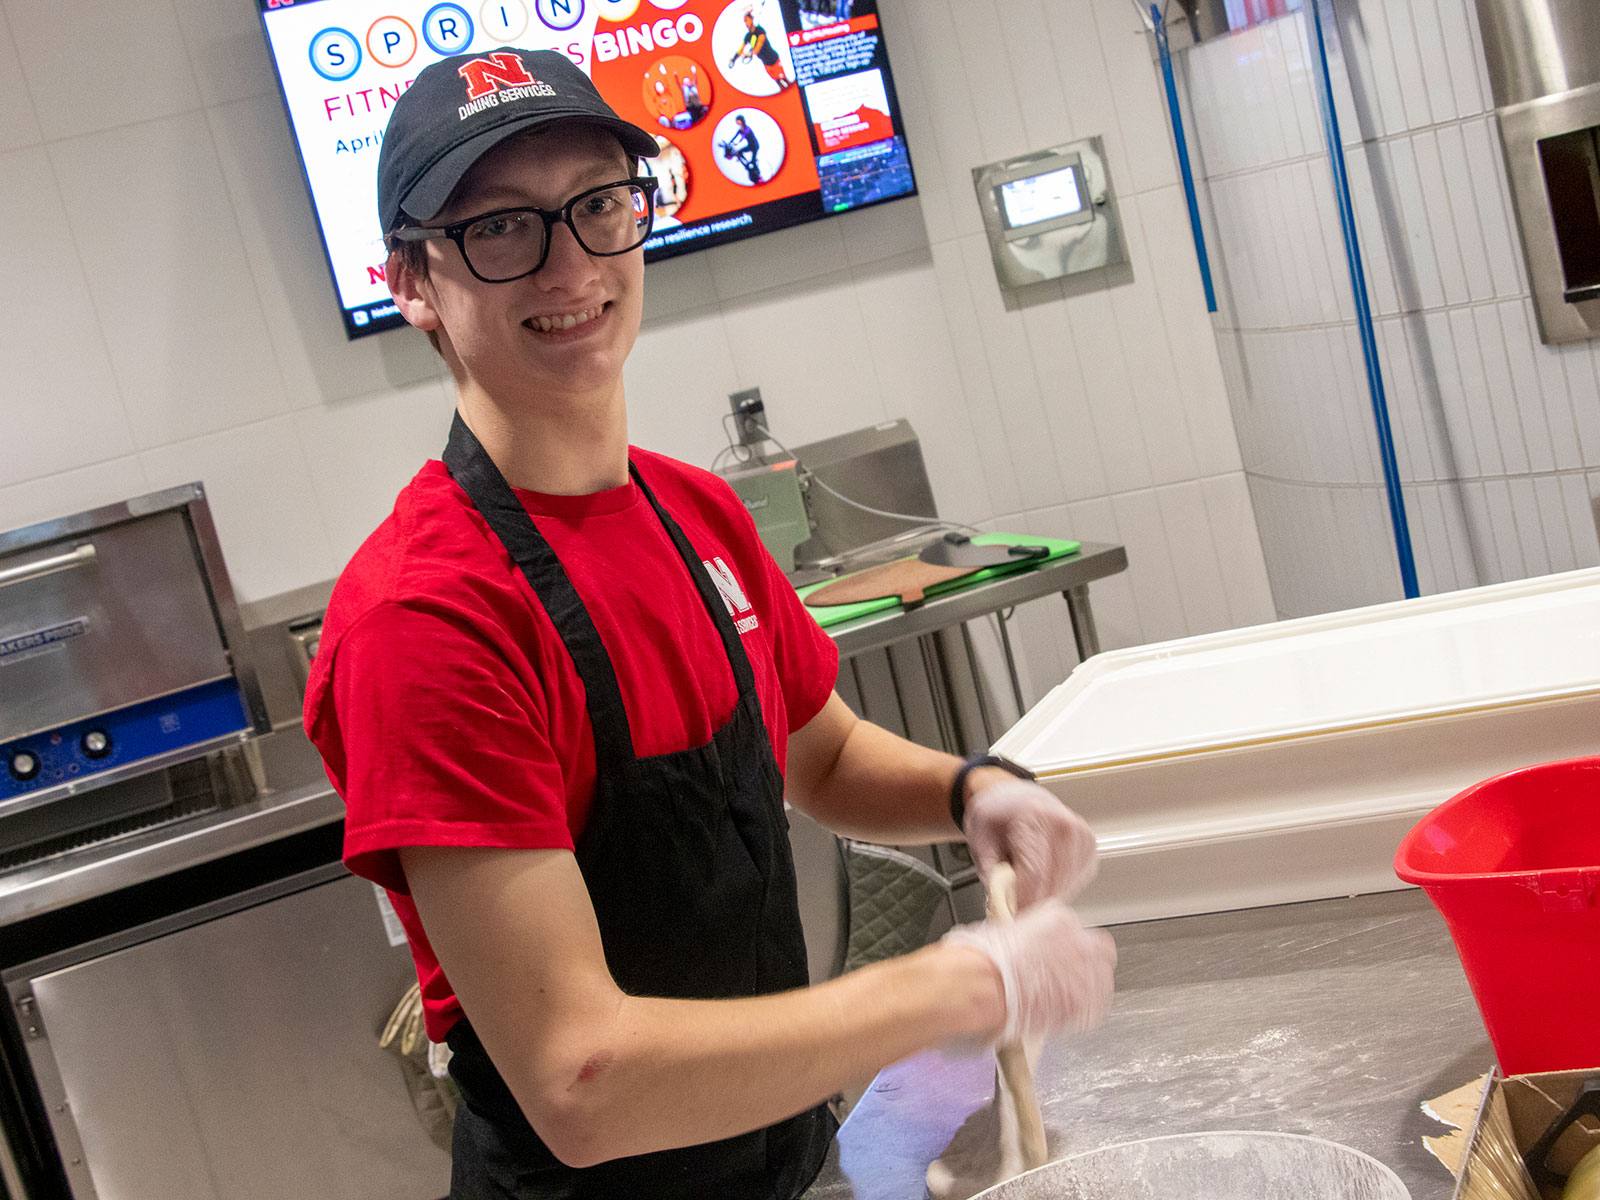 Leo Ray prepares a pizza as a dining student worker.